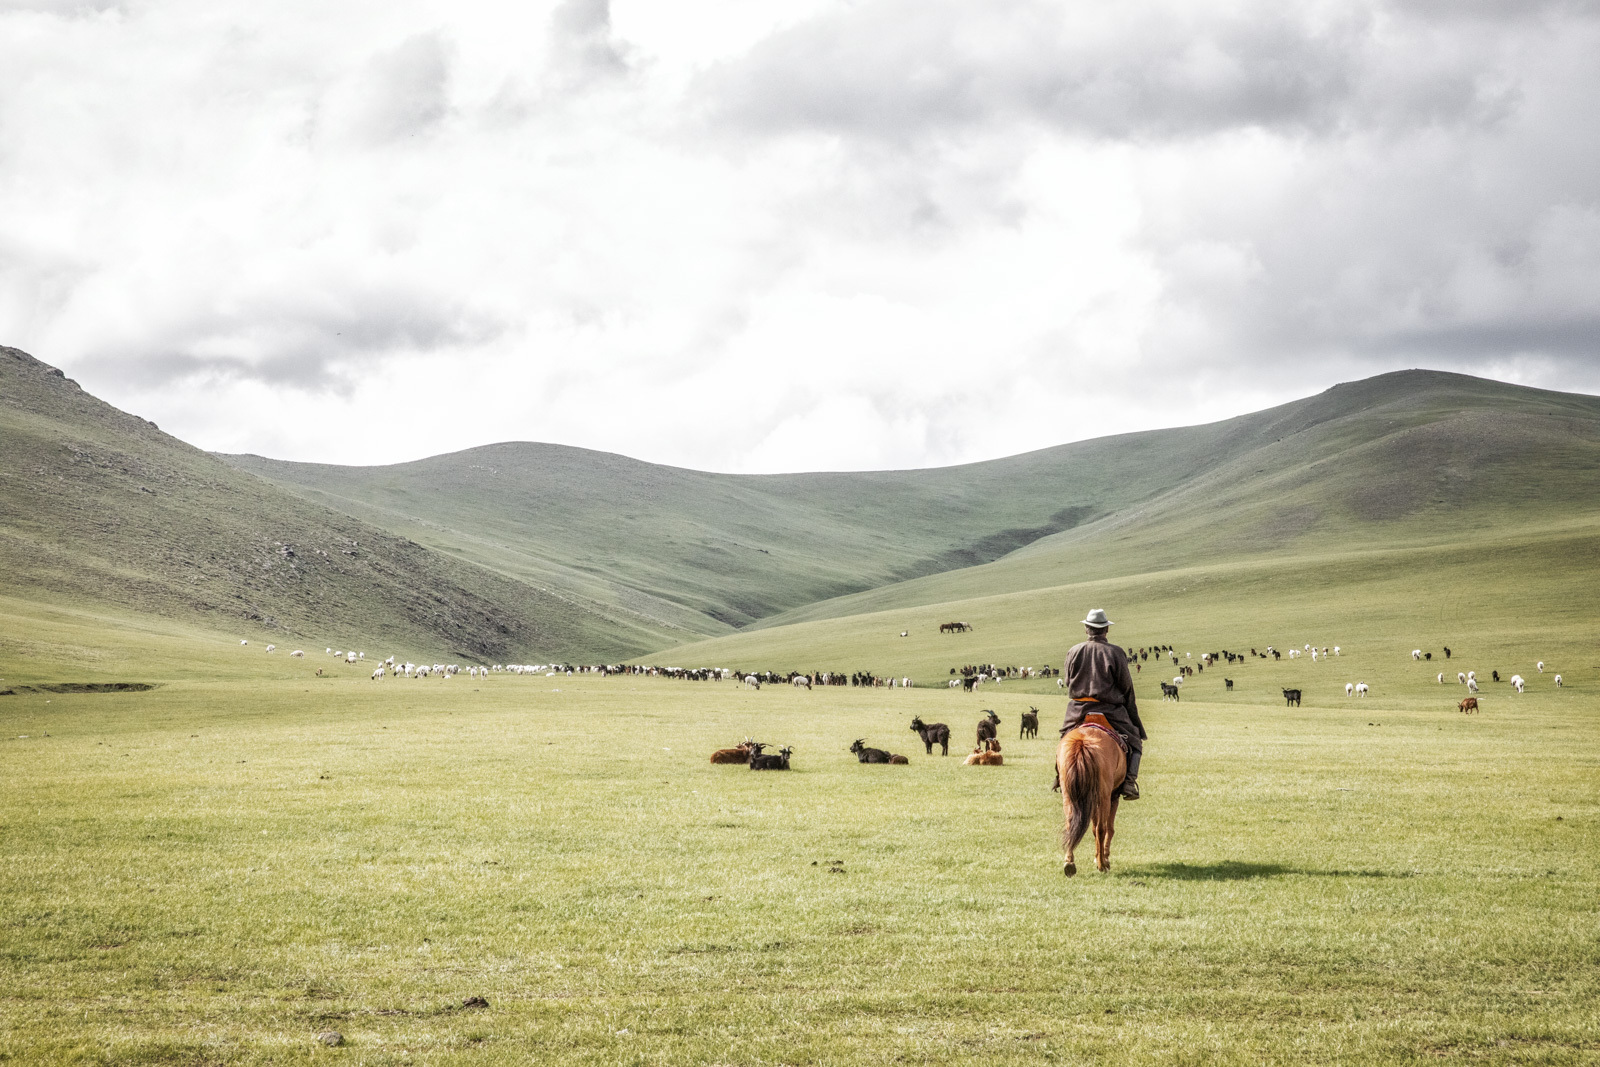 Horses in the Steppe 